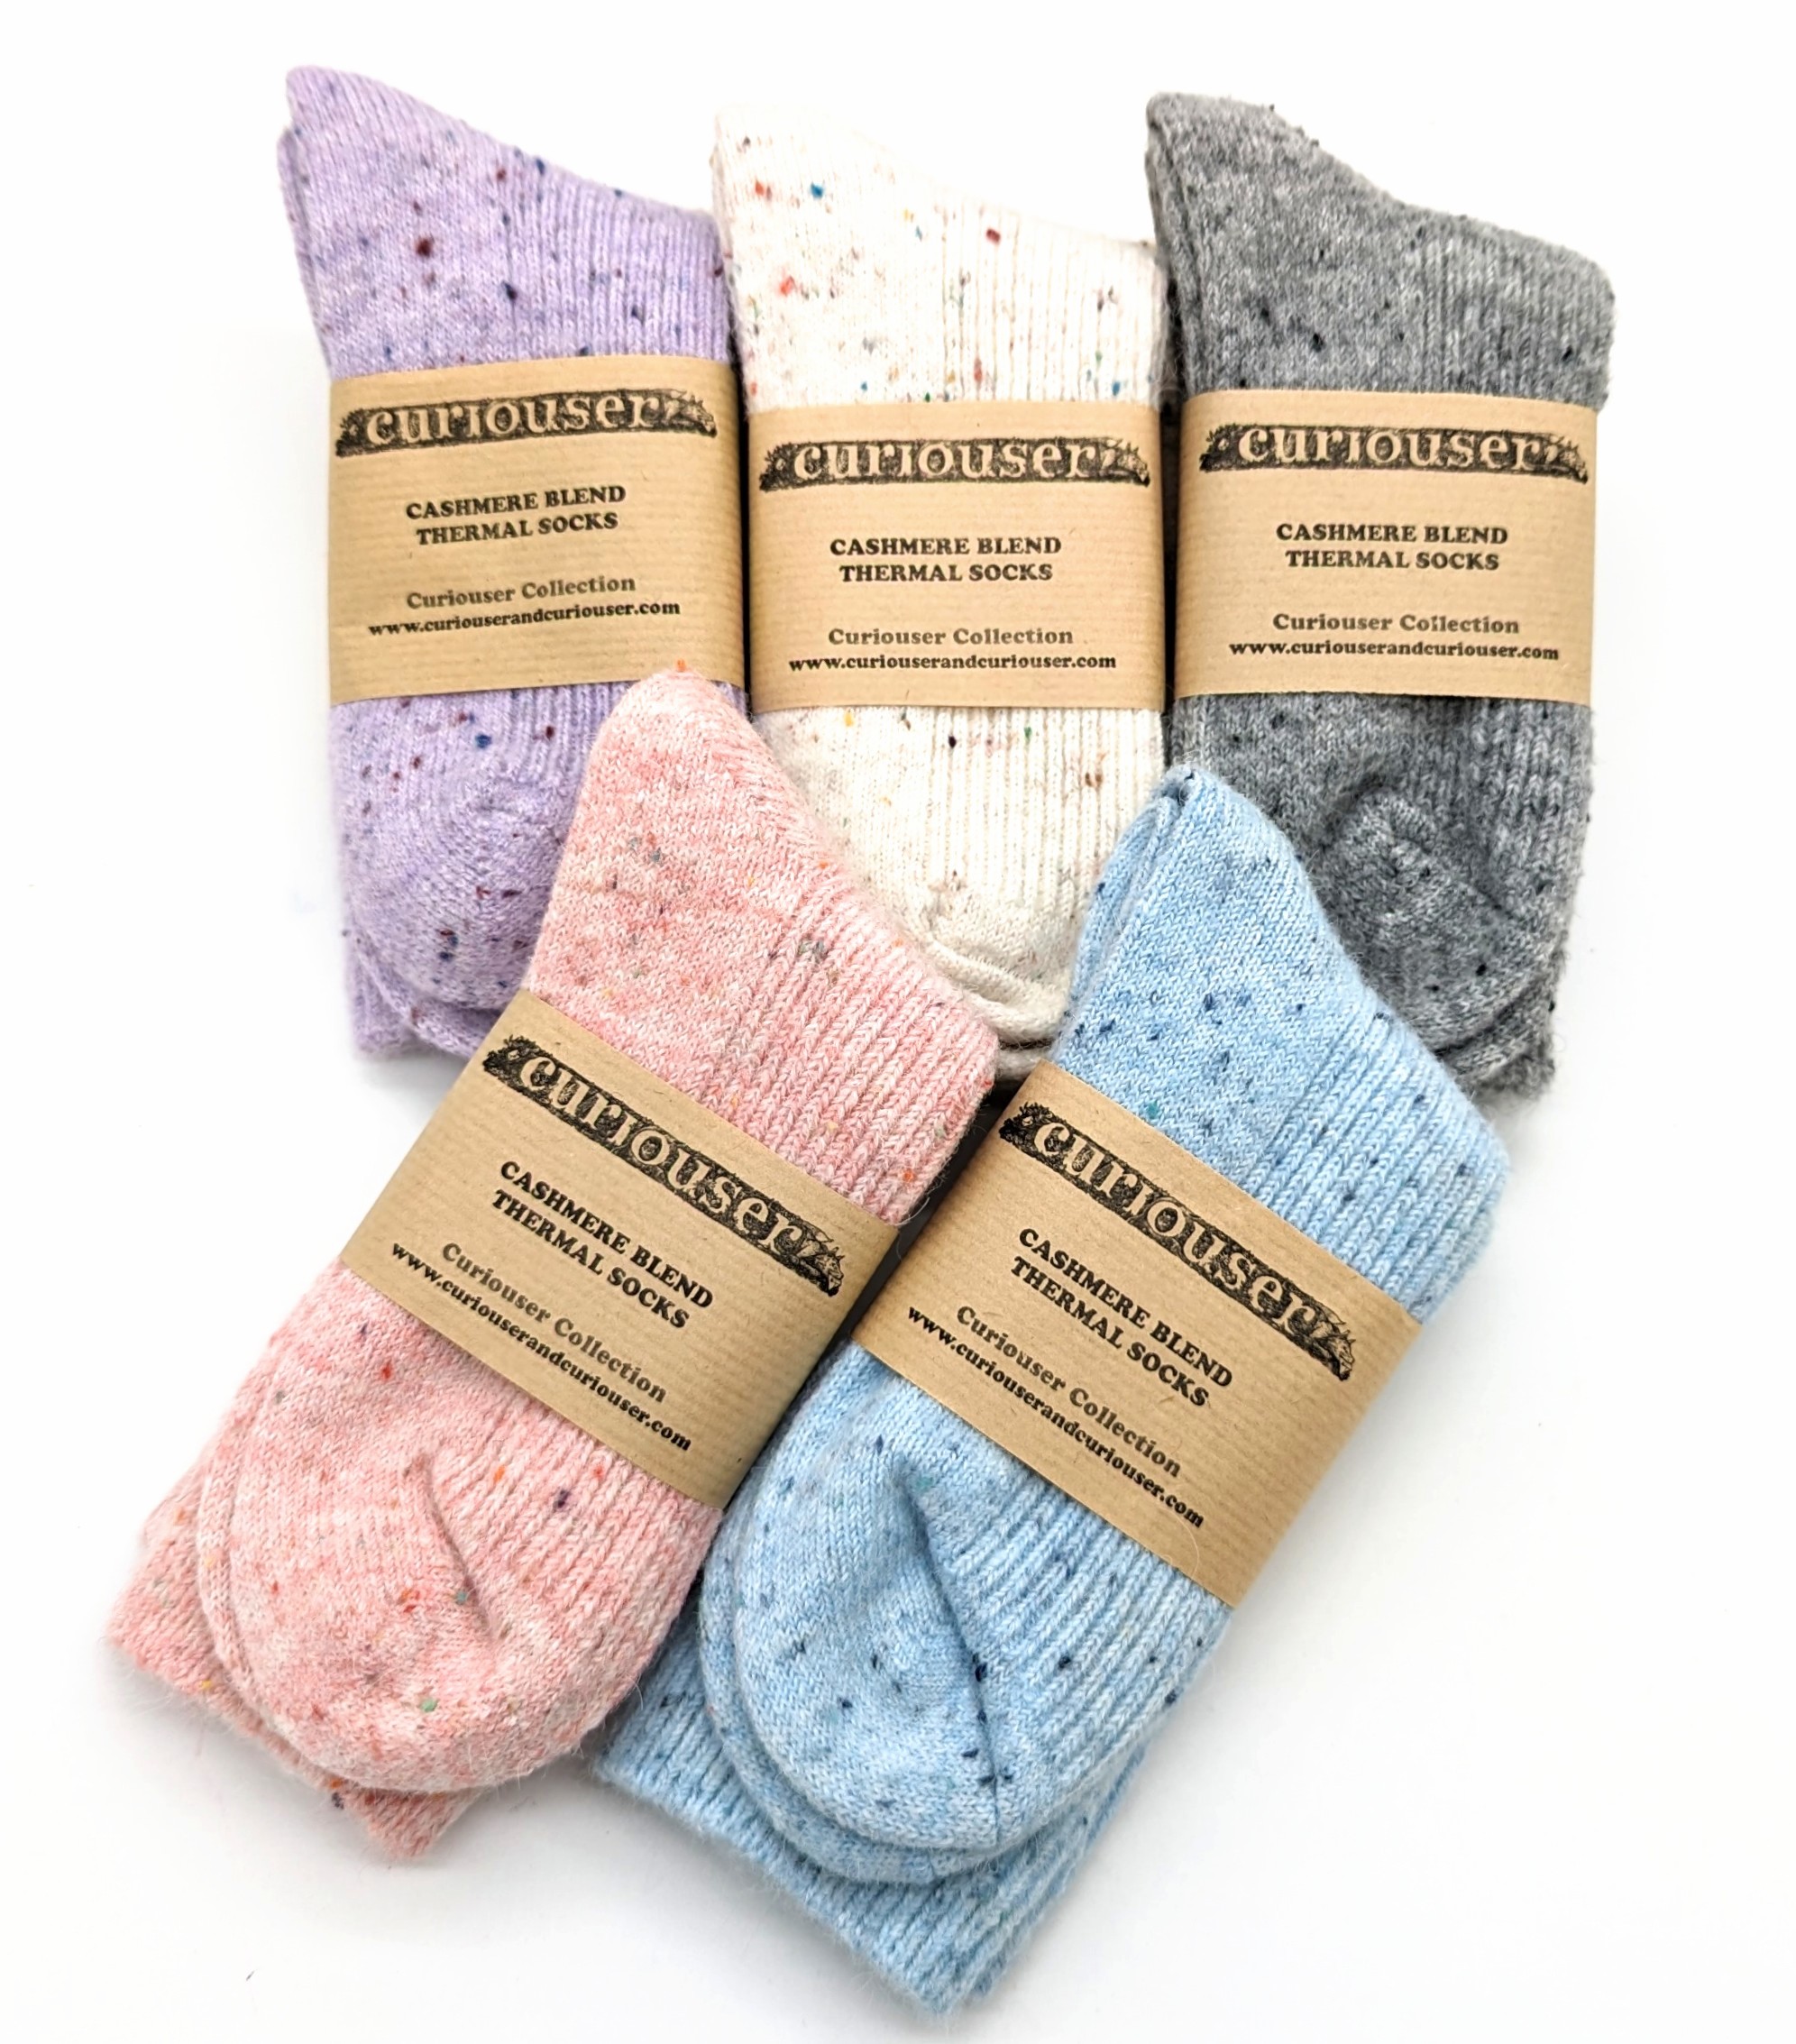 Curiouser Collection Cashmere Blend Speckled Thermal Socks